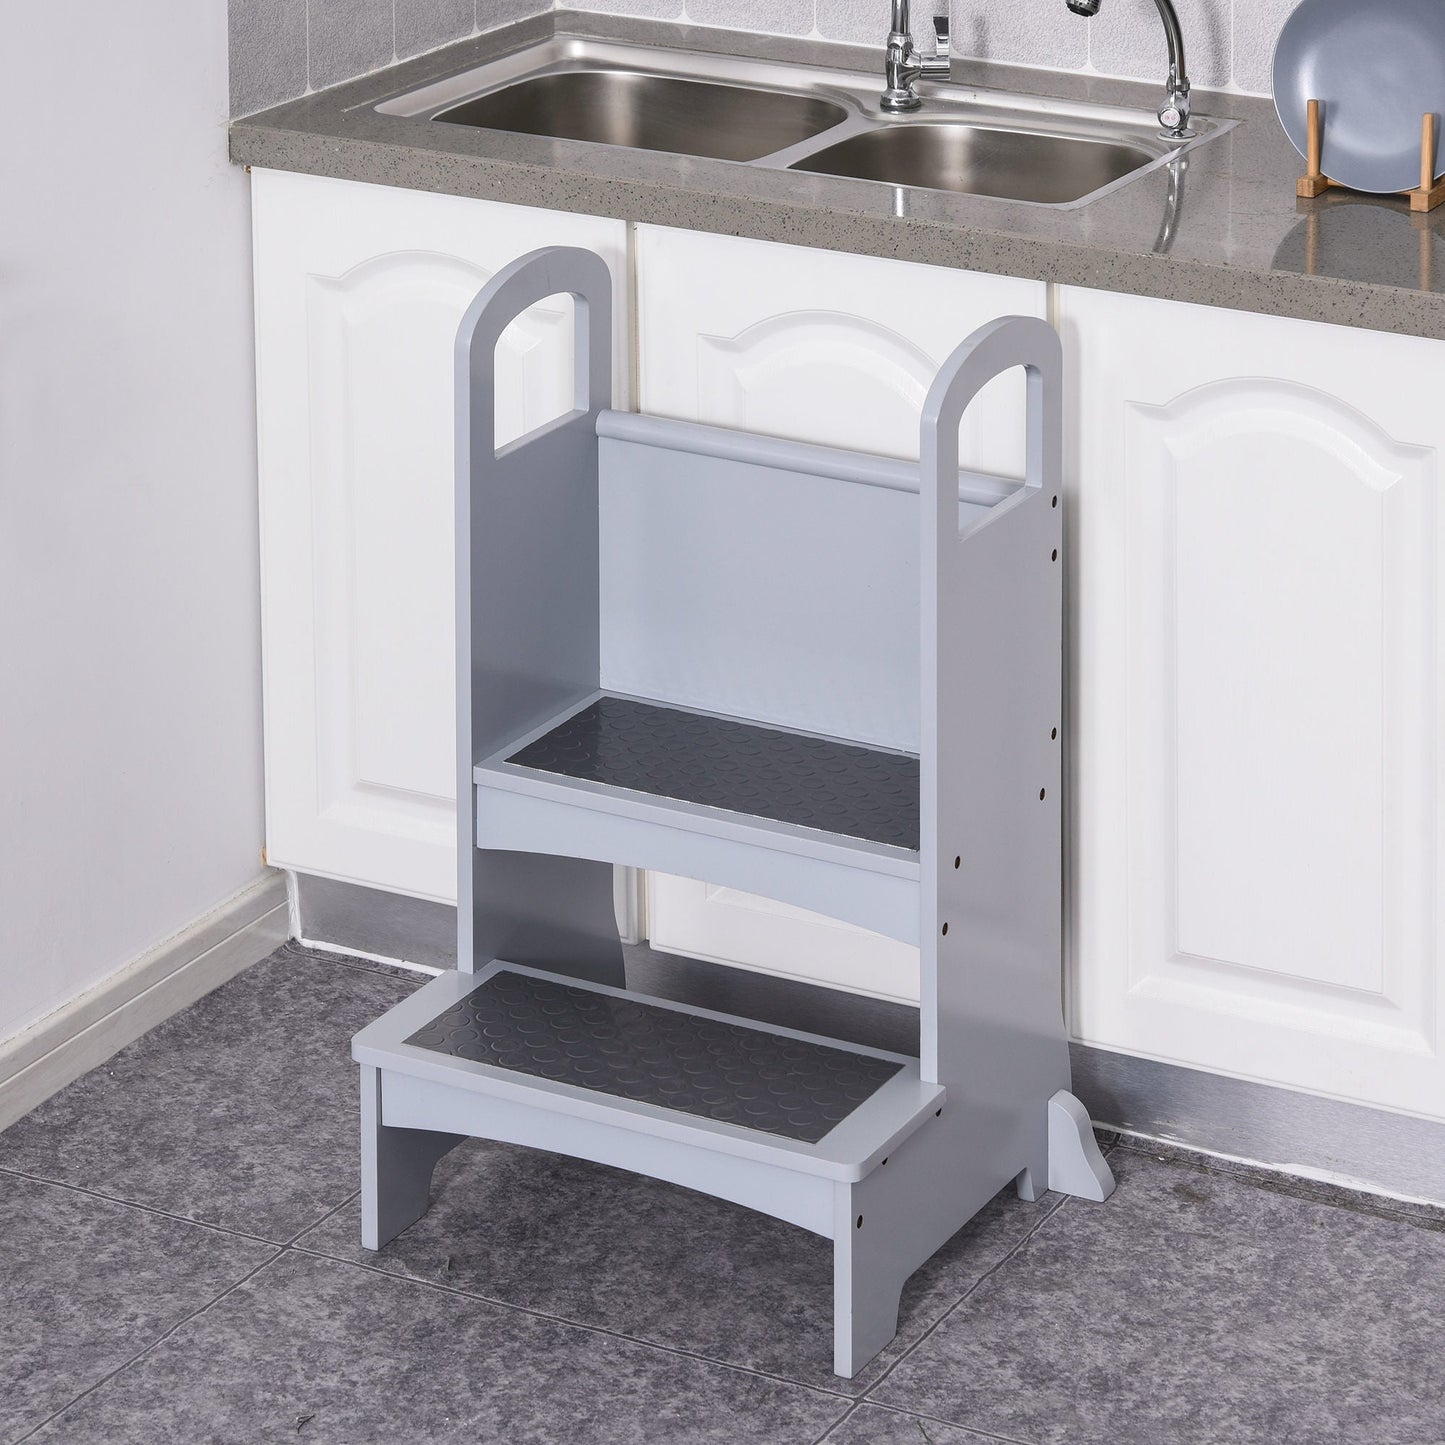 2 Step Stool Kids Kitchen Helper with Support Handles and Non-Slip Pad for Kitchen, Living room and Bathroom, Grey at Gallery Canada